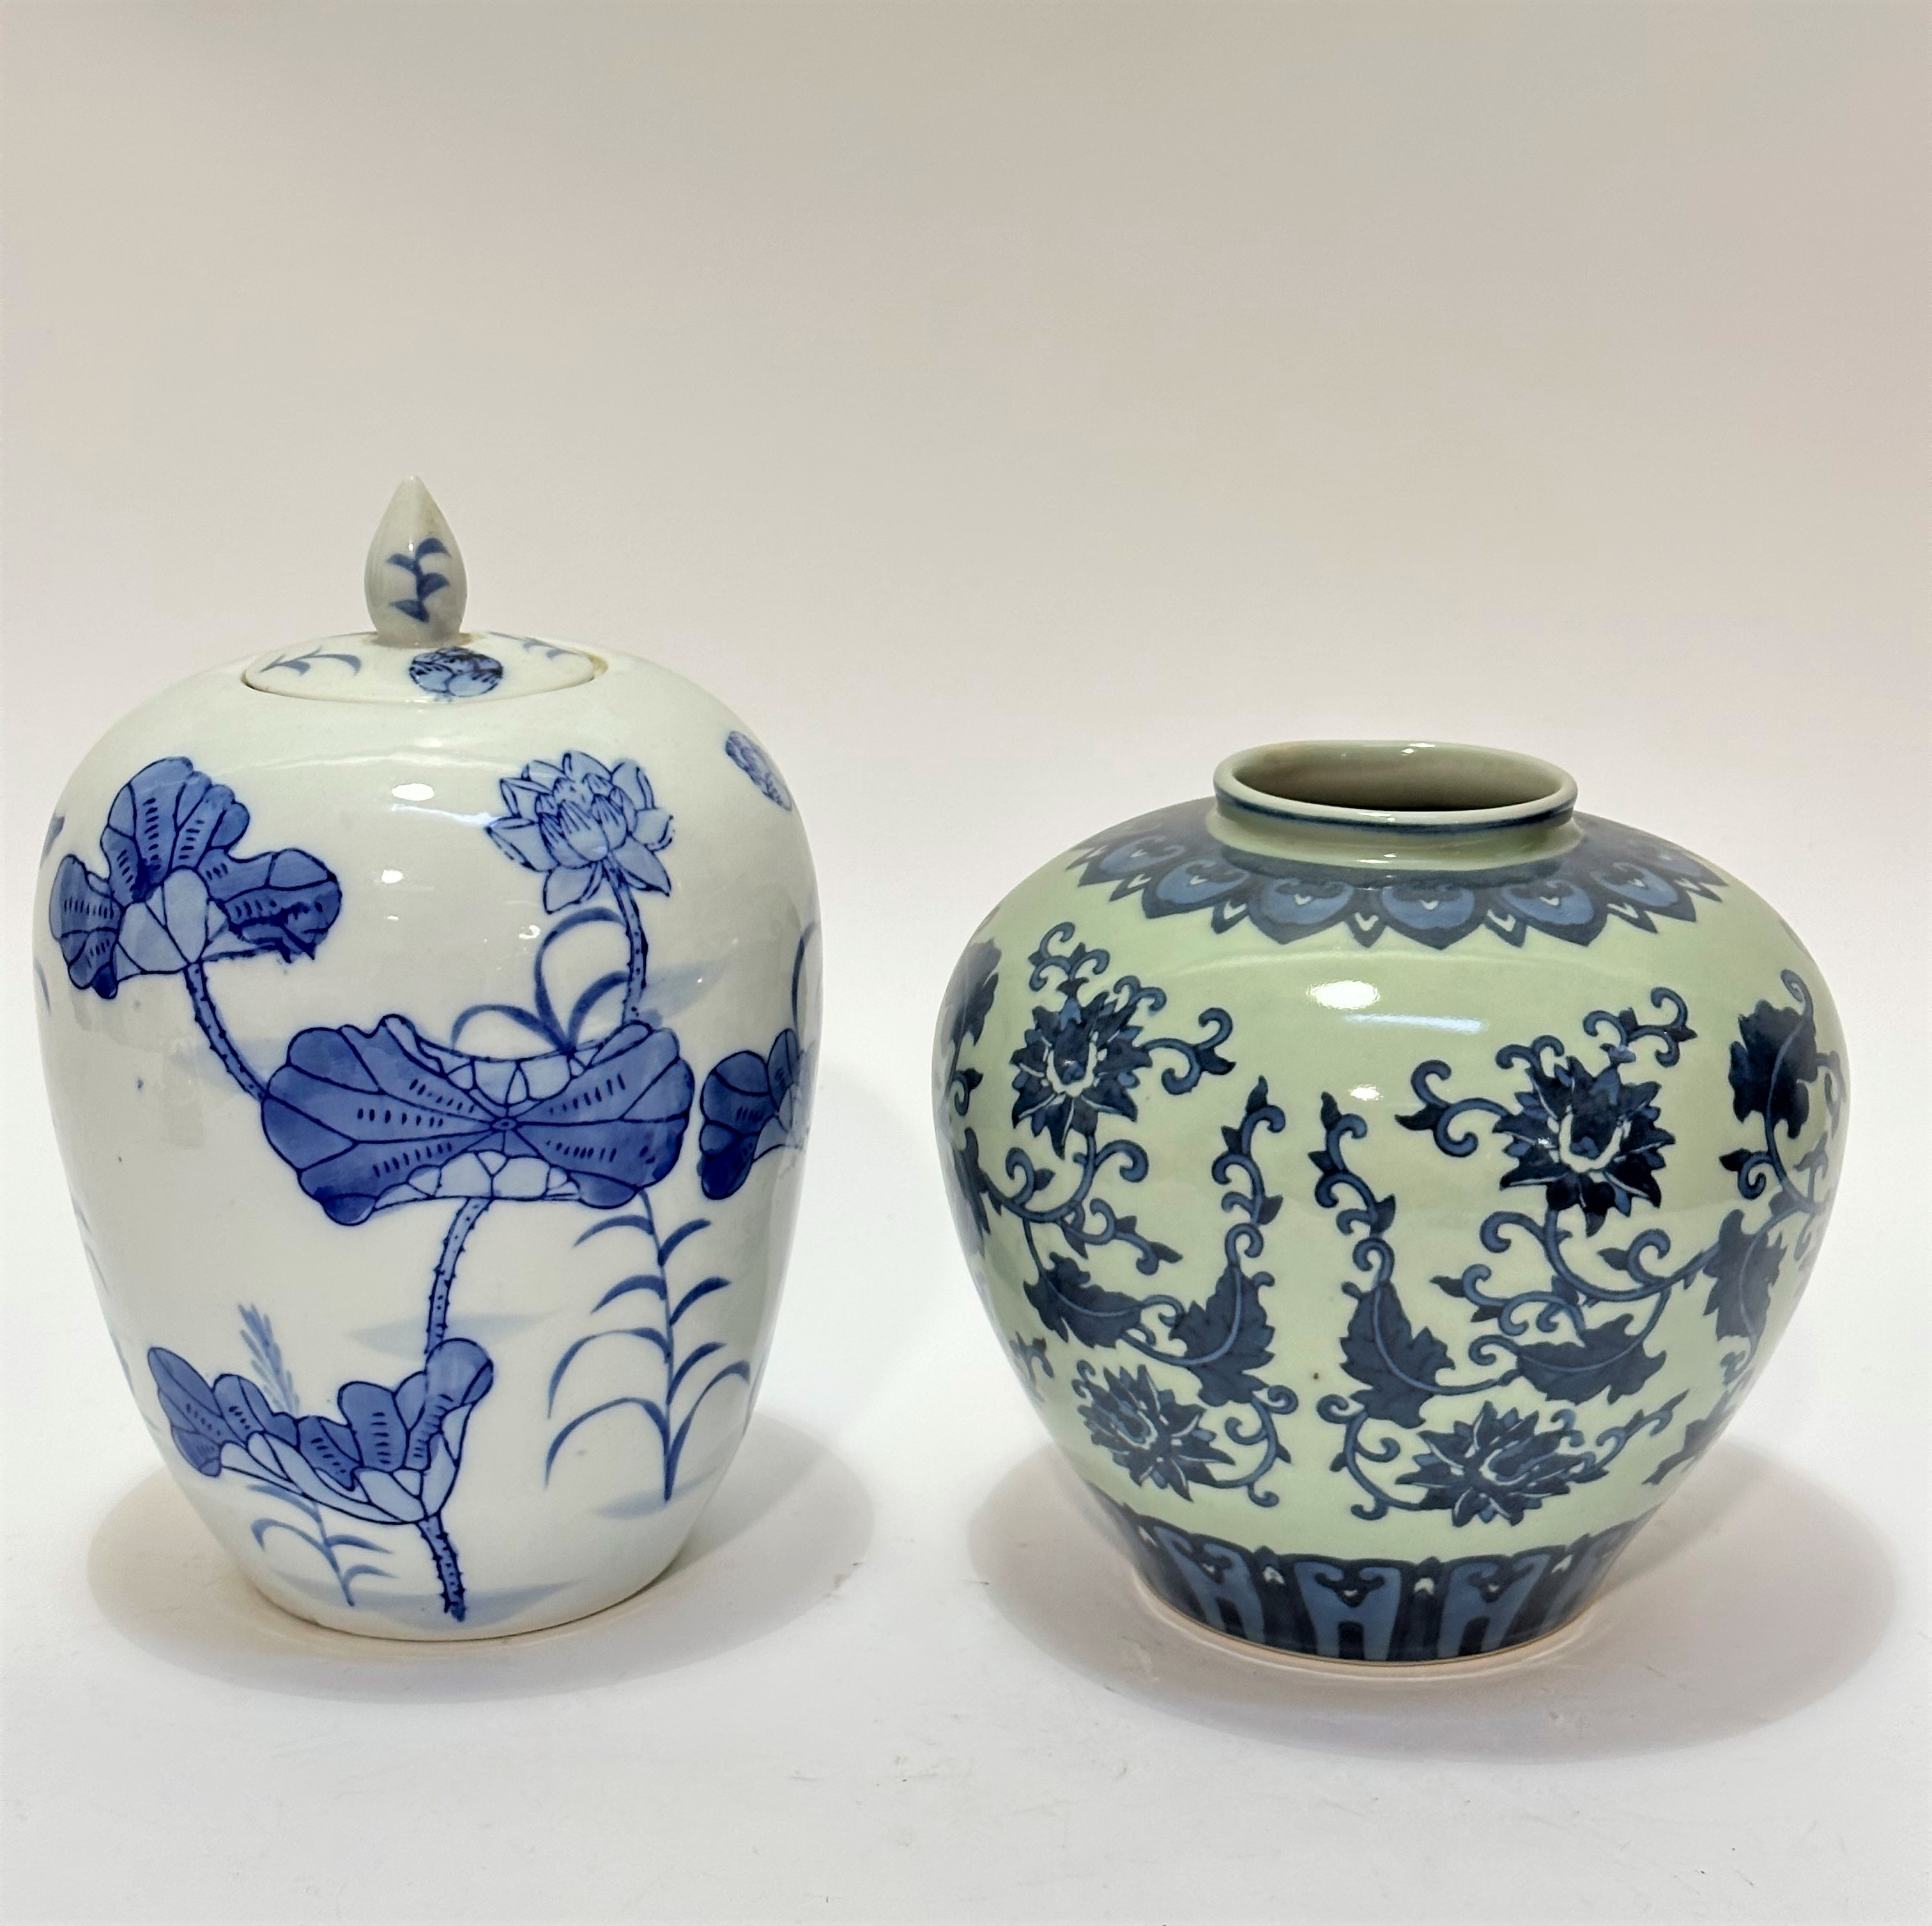 A modern Chinese blue and white ovoid ginger jar with water lily design complete with cover and